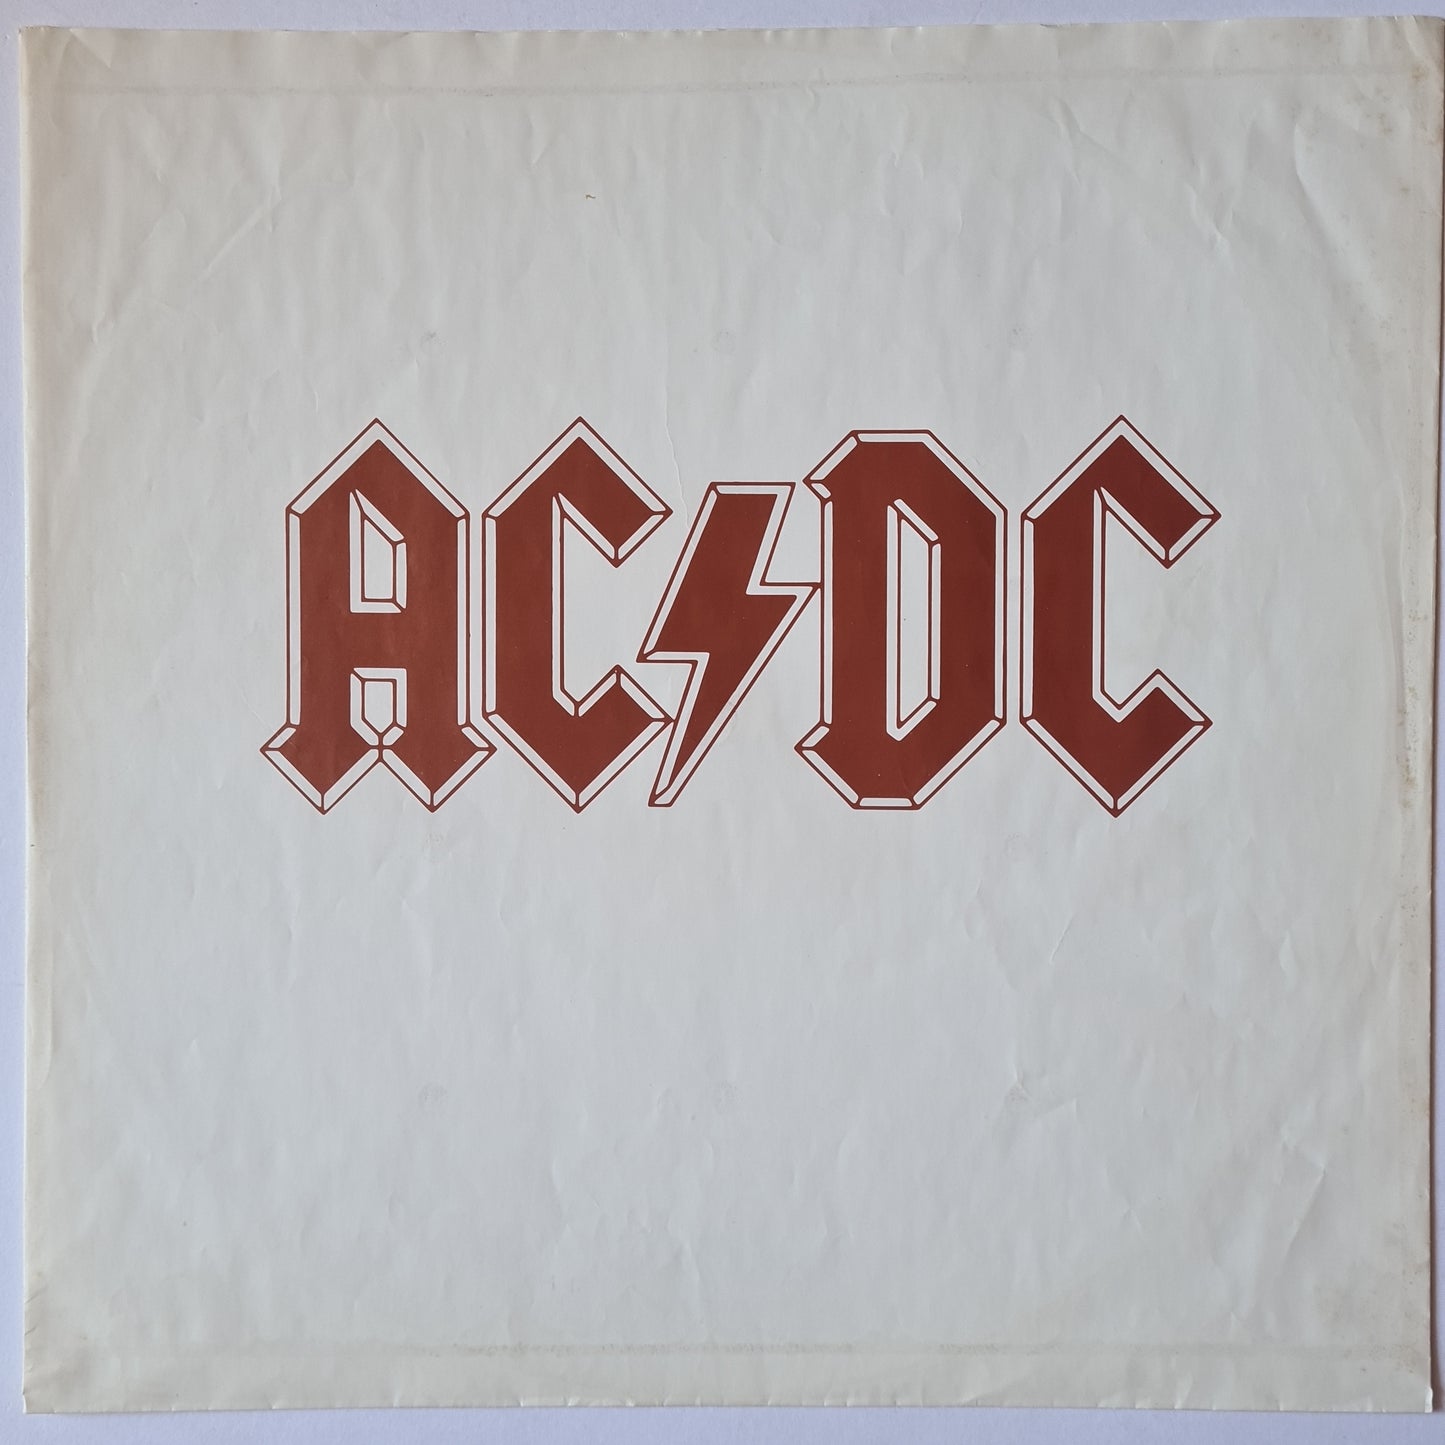 AC/DC – Fly On The Wall - 1985 (1985 German Pressing) - Vinyl Record